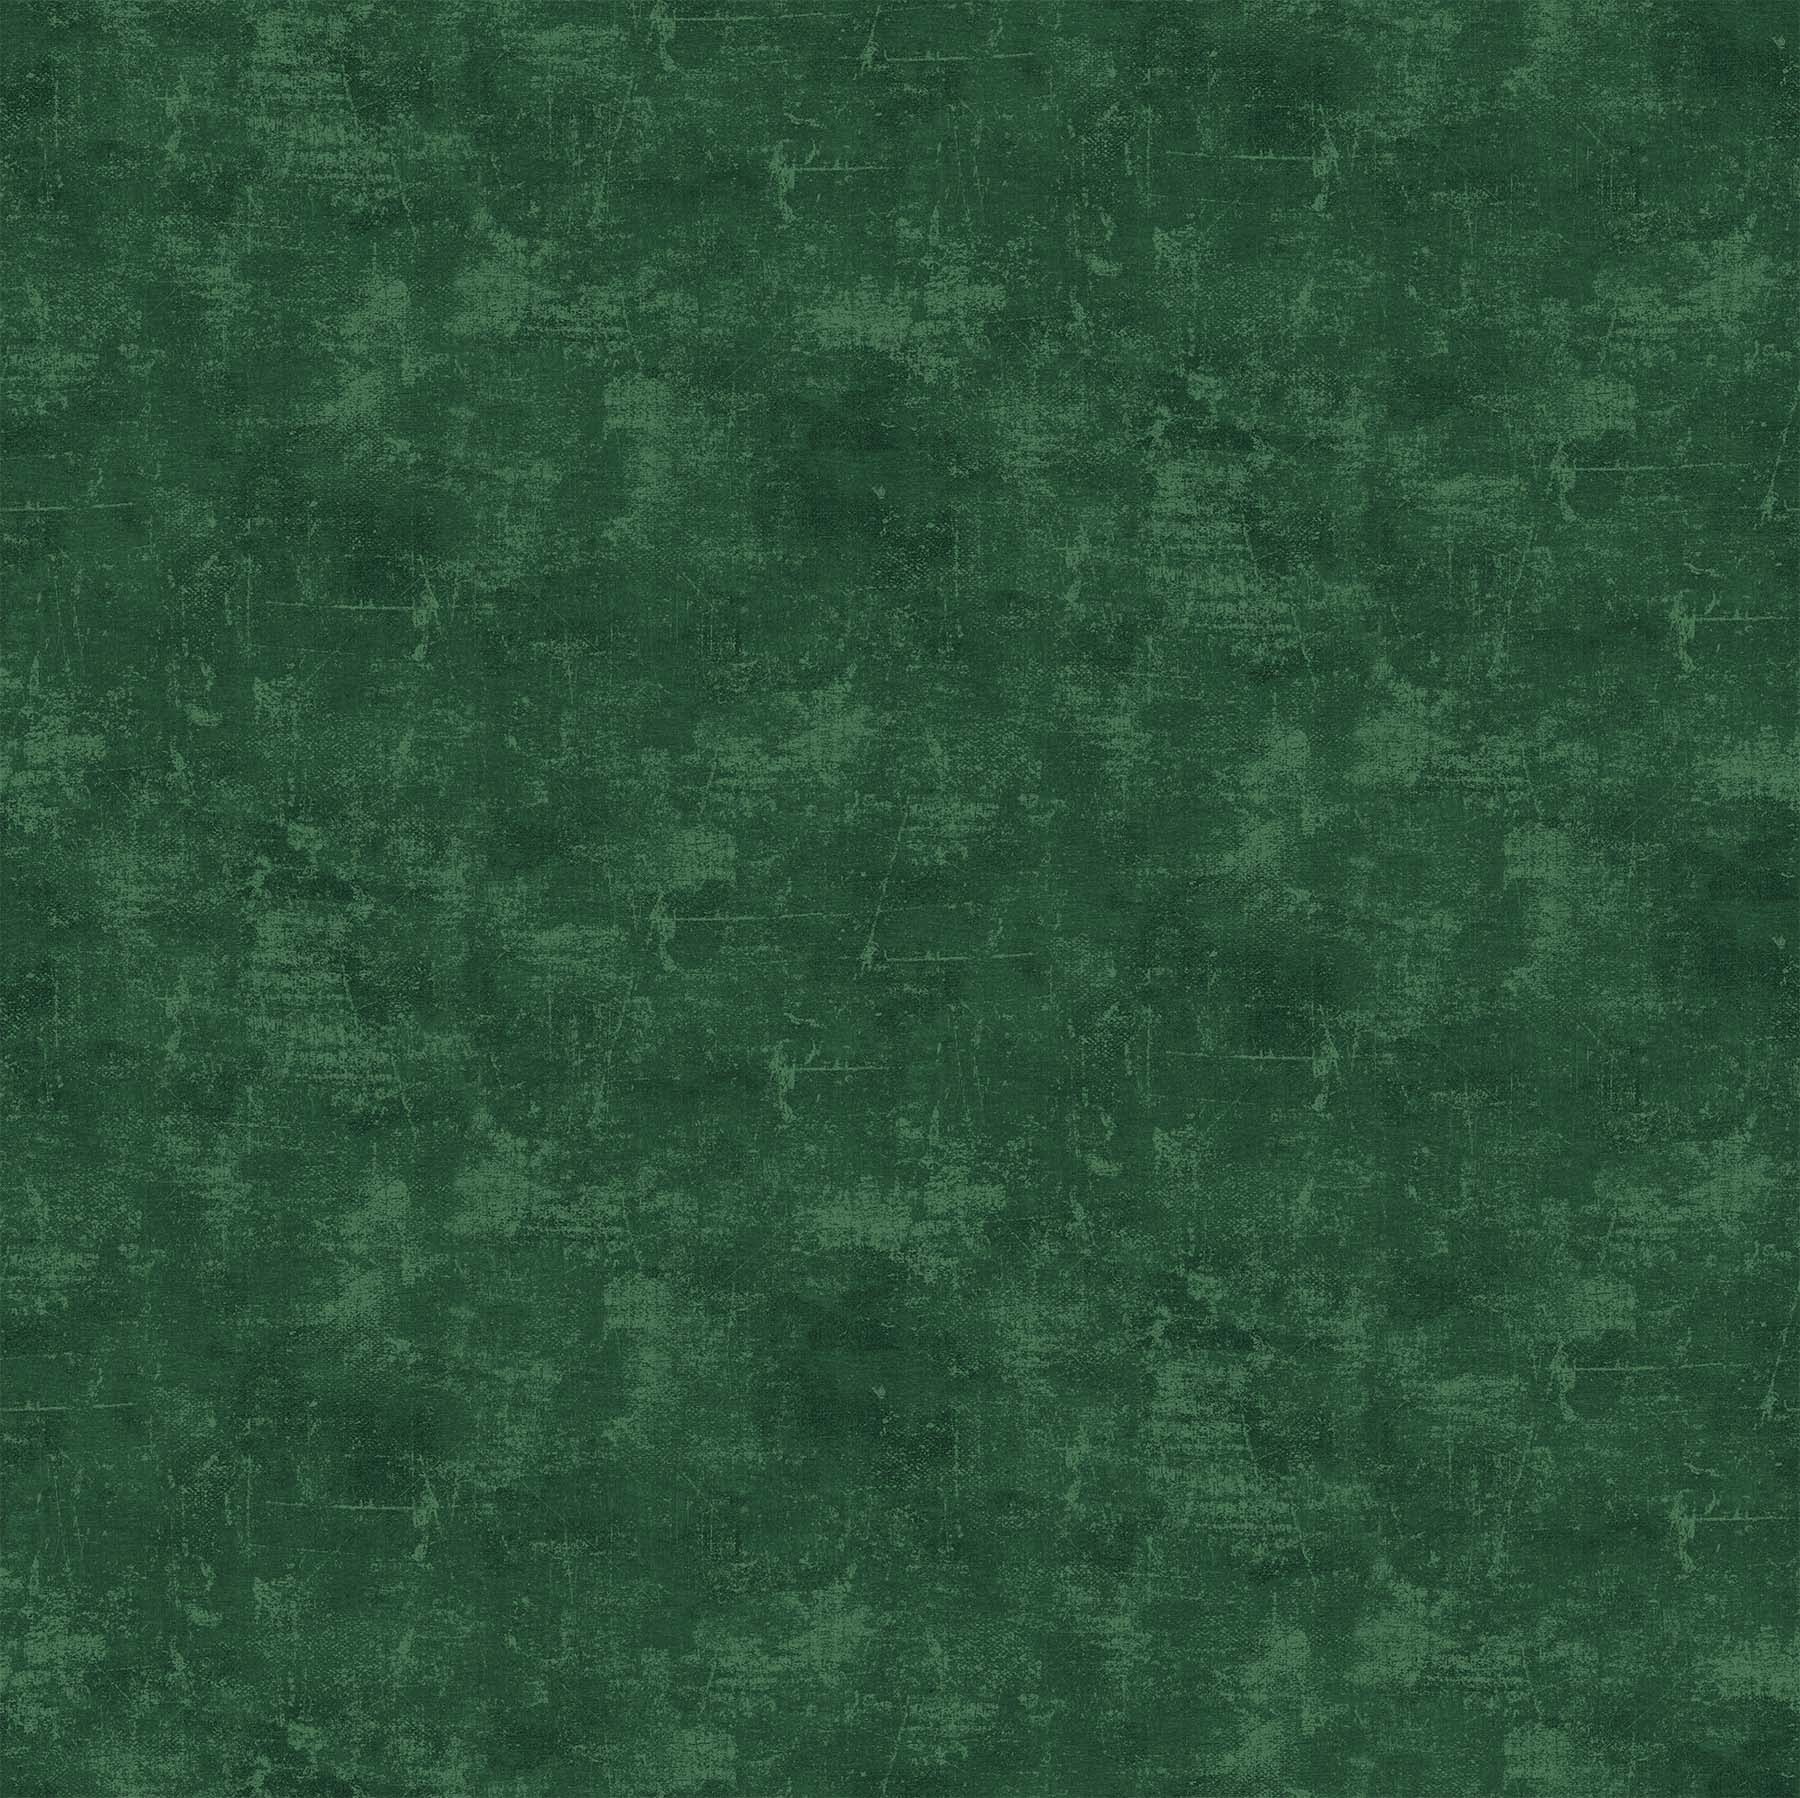 Green Pine Needle Canvas 45" Flannel Cotton Fabric per yard - Linda's Electric Quilters